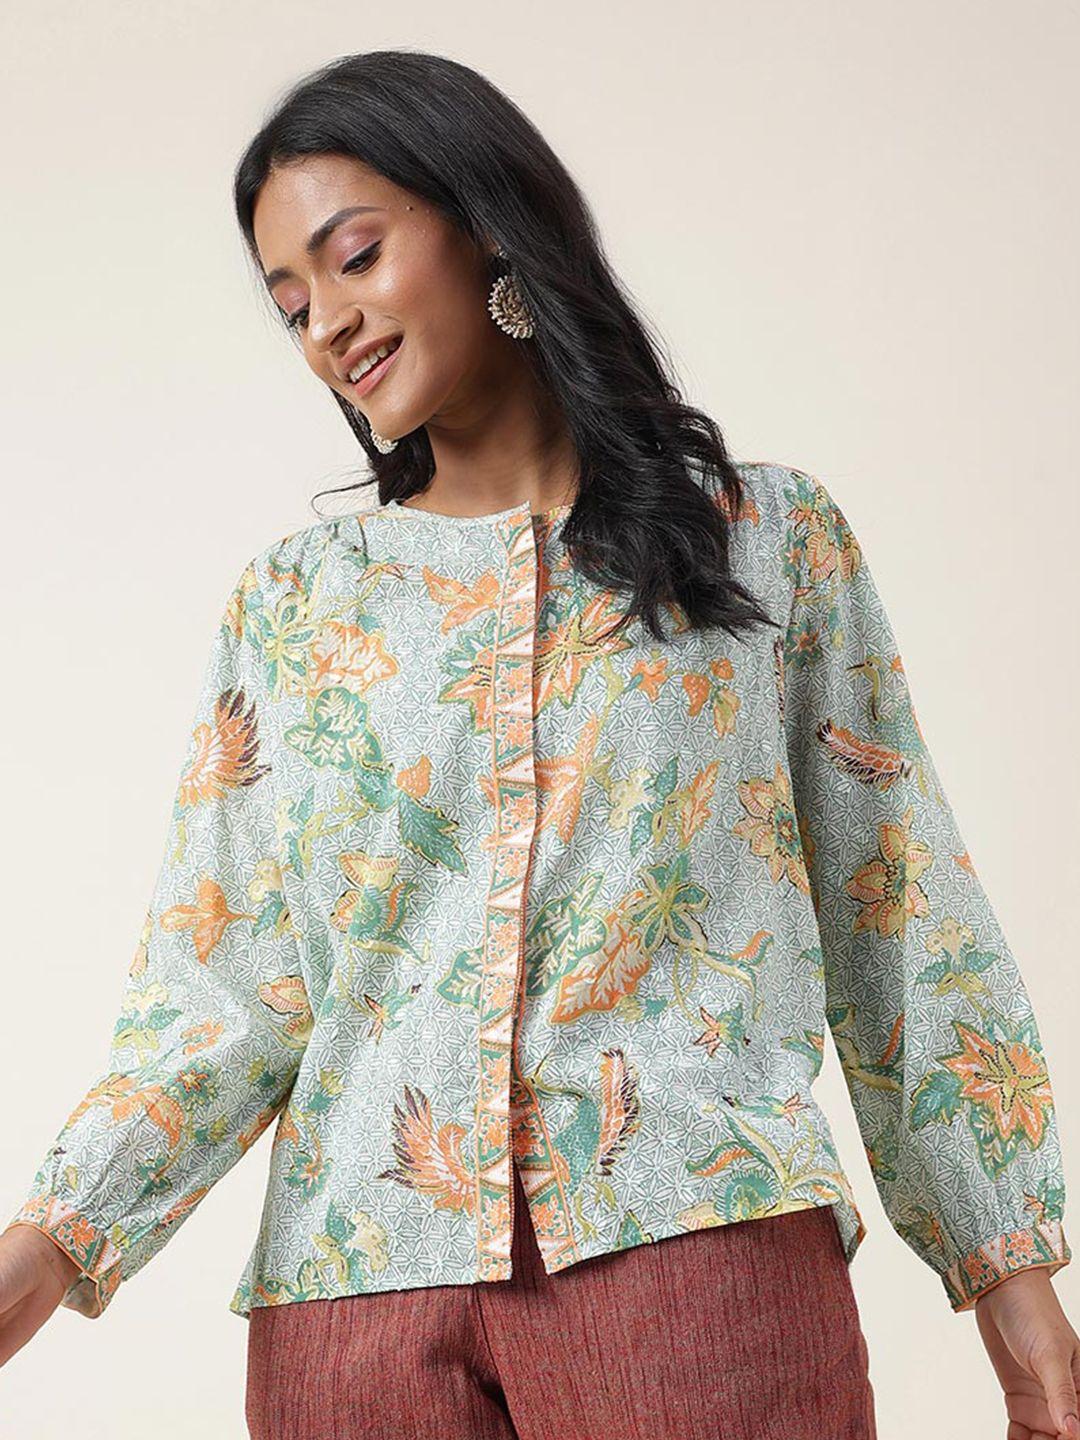 fabindia floral printed cotton shirt style top